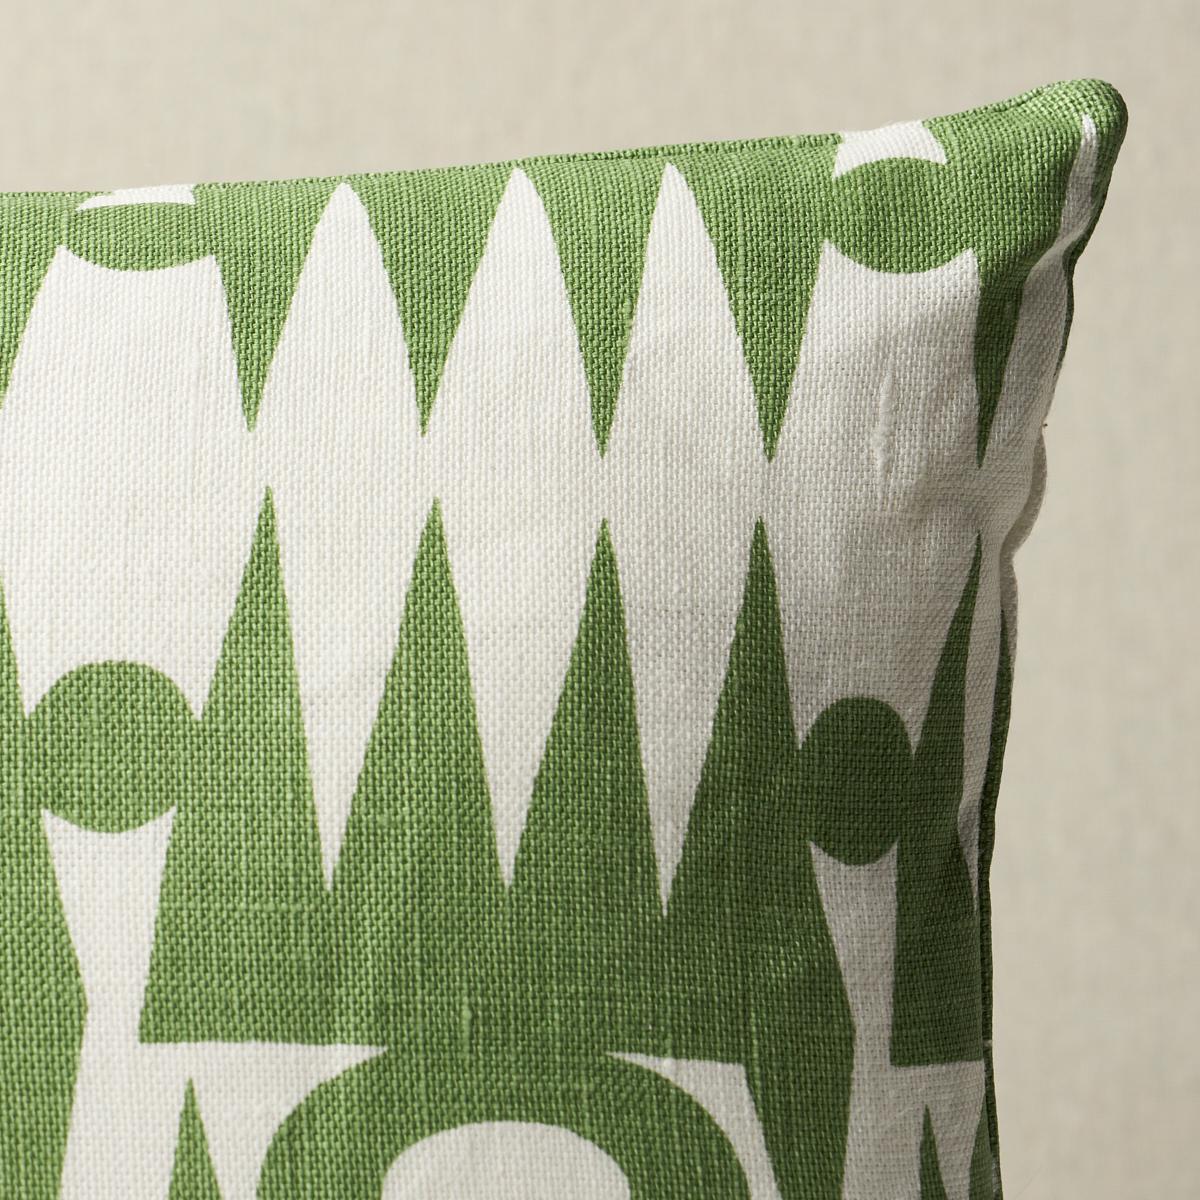 This pillow features Ra by Drusus Tabor with a knife edge finish. Created in collaboration with Drusus Tabor and named for the Egyptian sun god, Ra is a dynamic geometric design that creates a vertical stripe effect. Pillow includes a feather/down